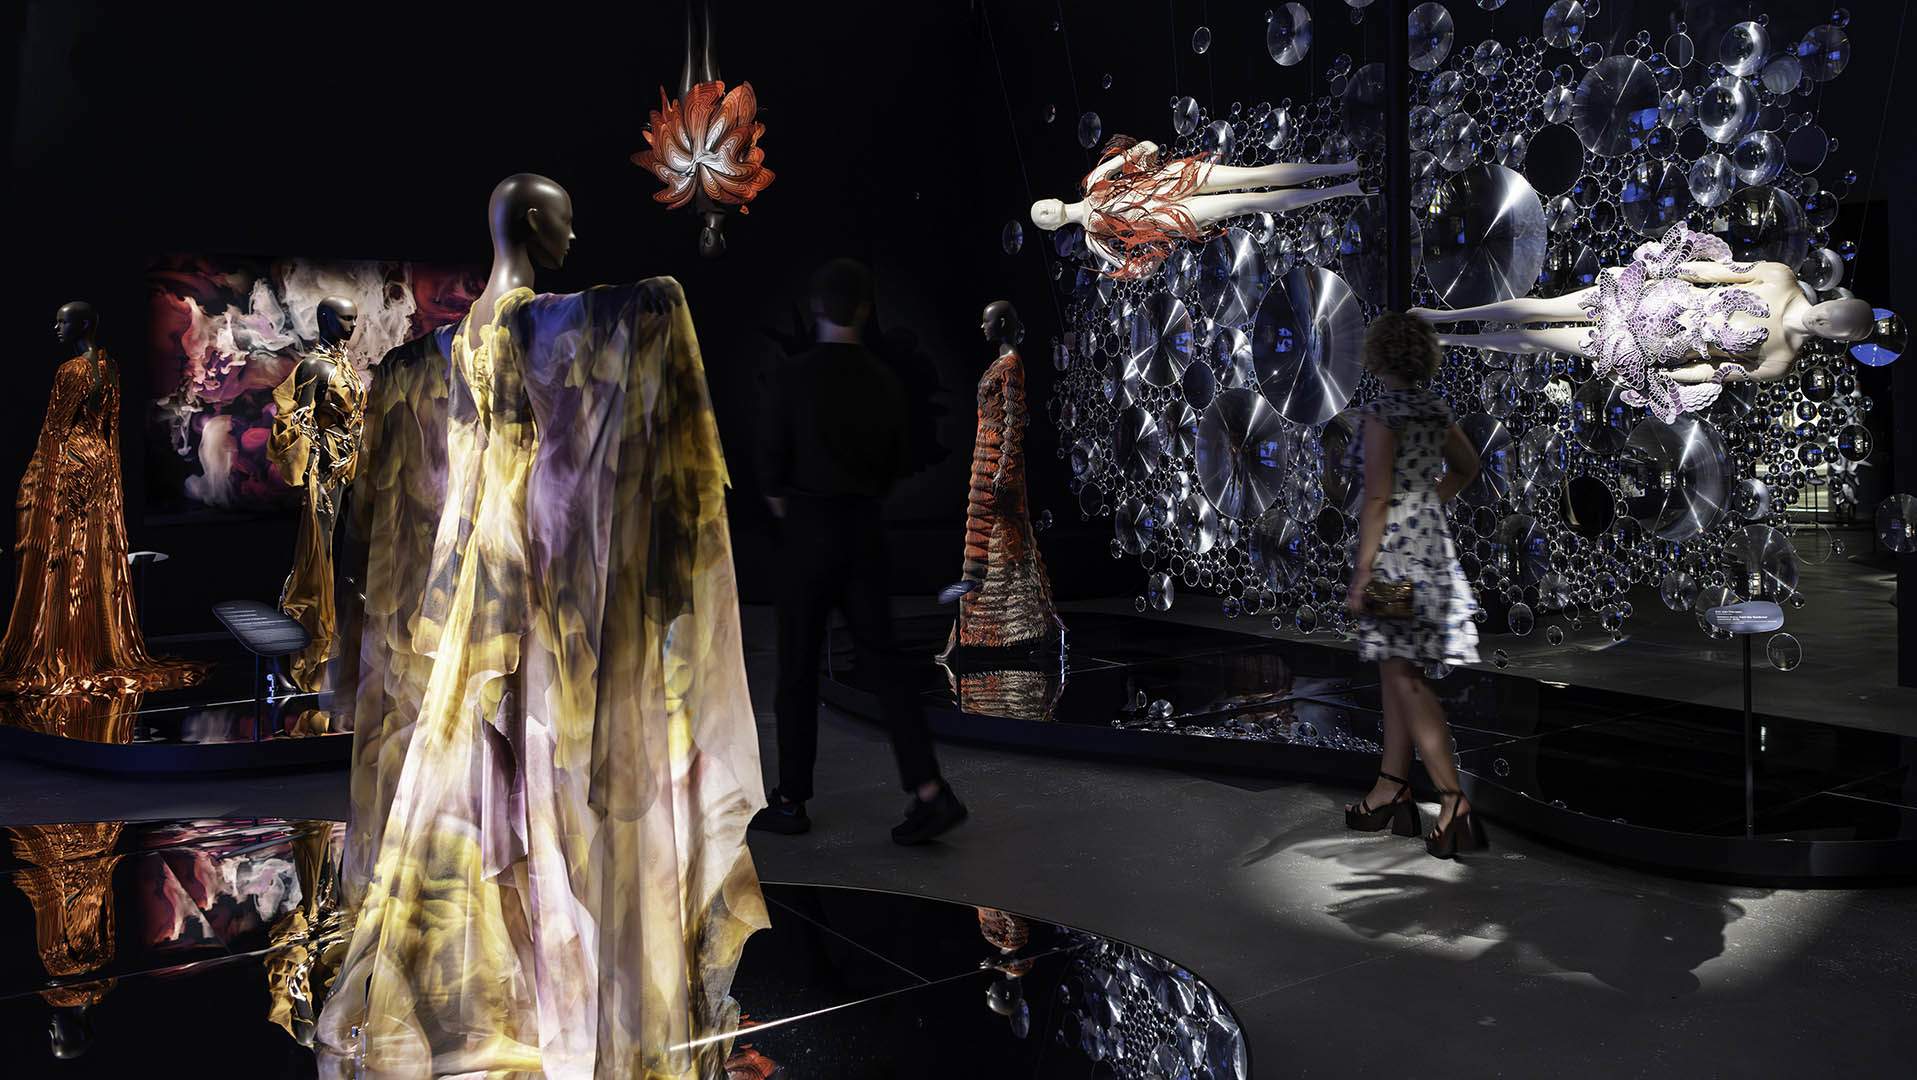 Now Open: Iris van Herpen's Stunning Couture Designs Have Arrived Down Under at GOMA's 'Sculpting the Senses' Exhibition